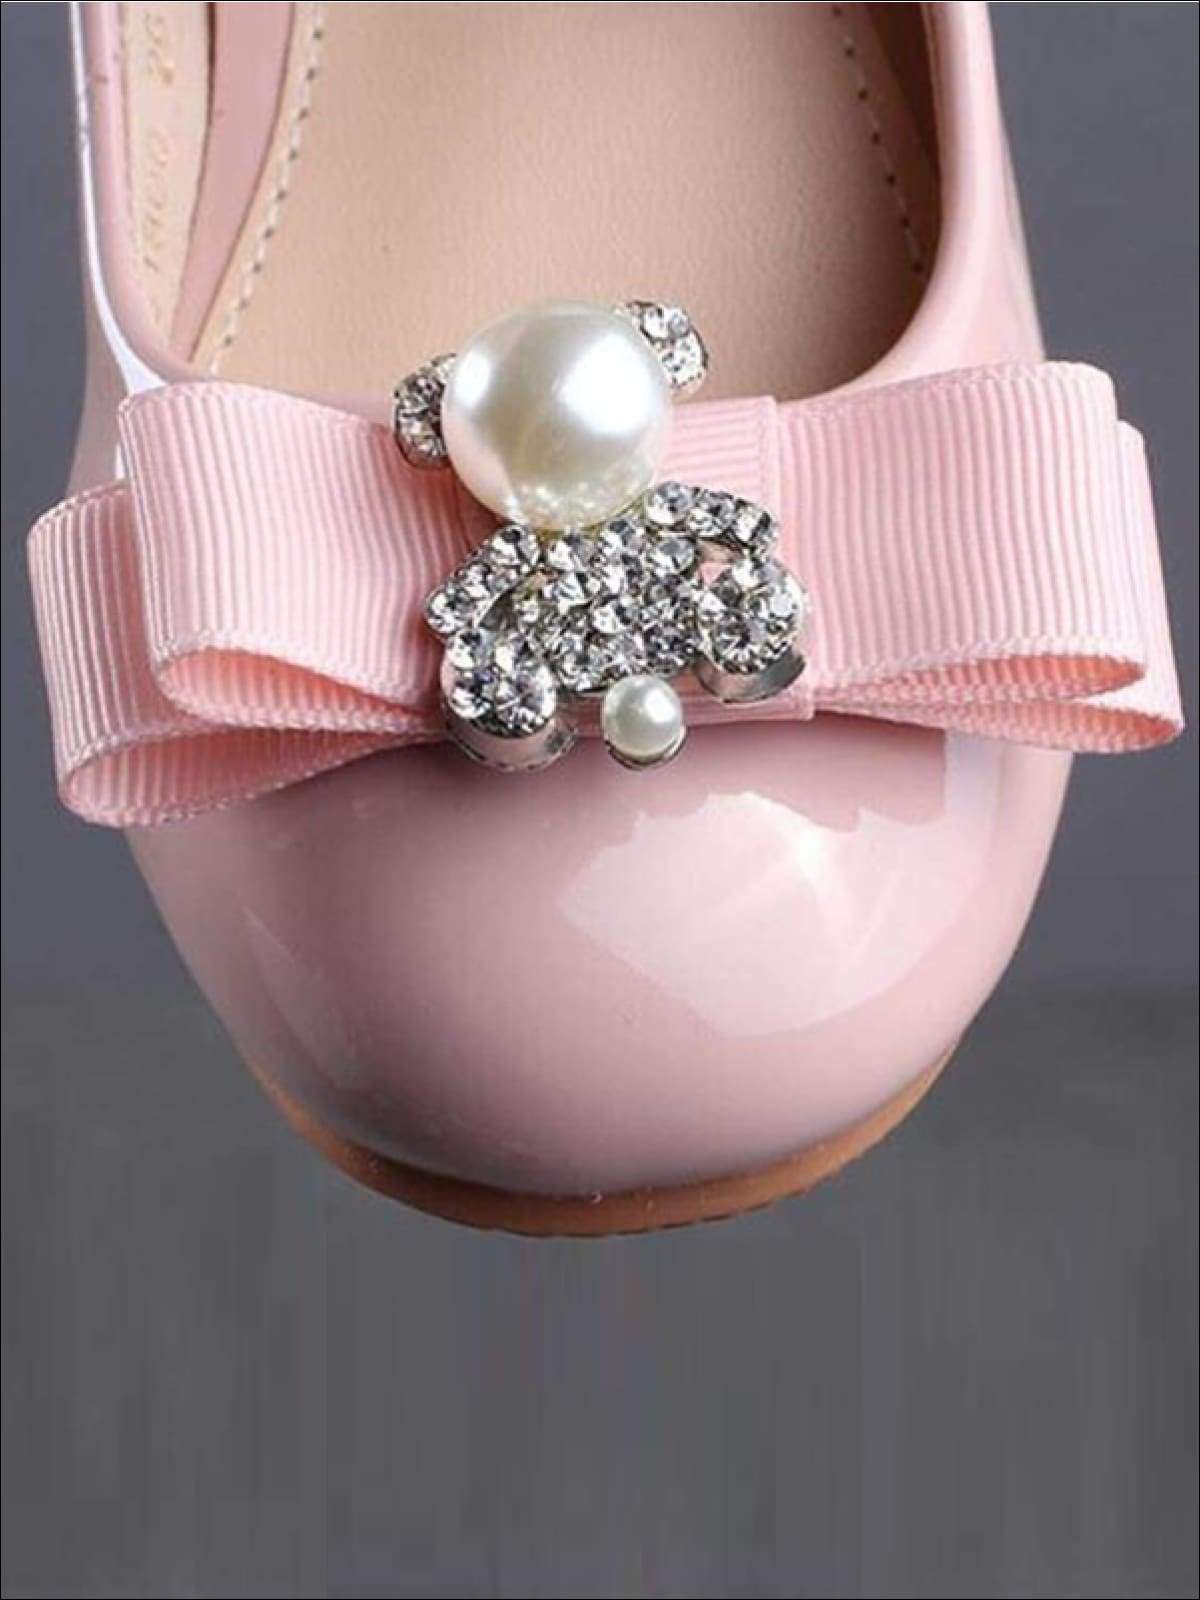 Girls Rhinestone Embellished Bow Tie Princess Shoes with Ankle Strap (Pink & Black) - Girls Flats